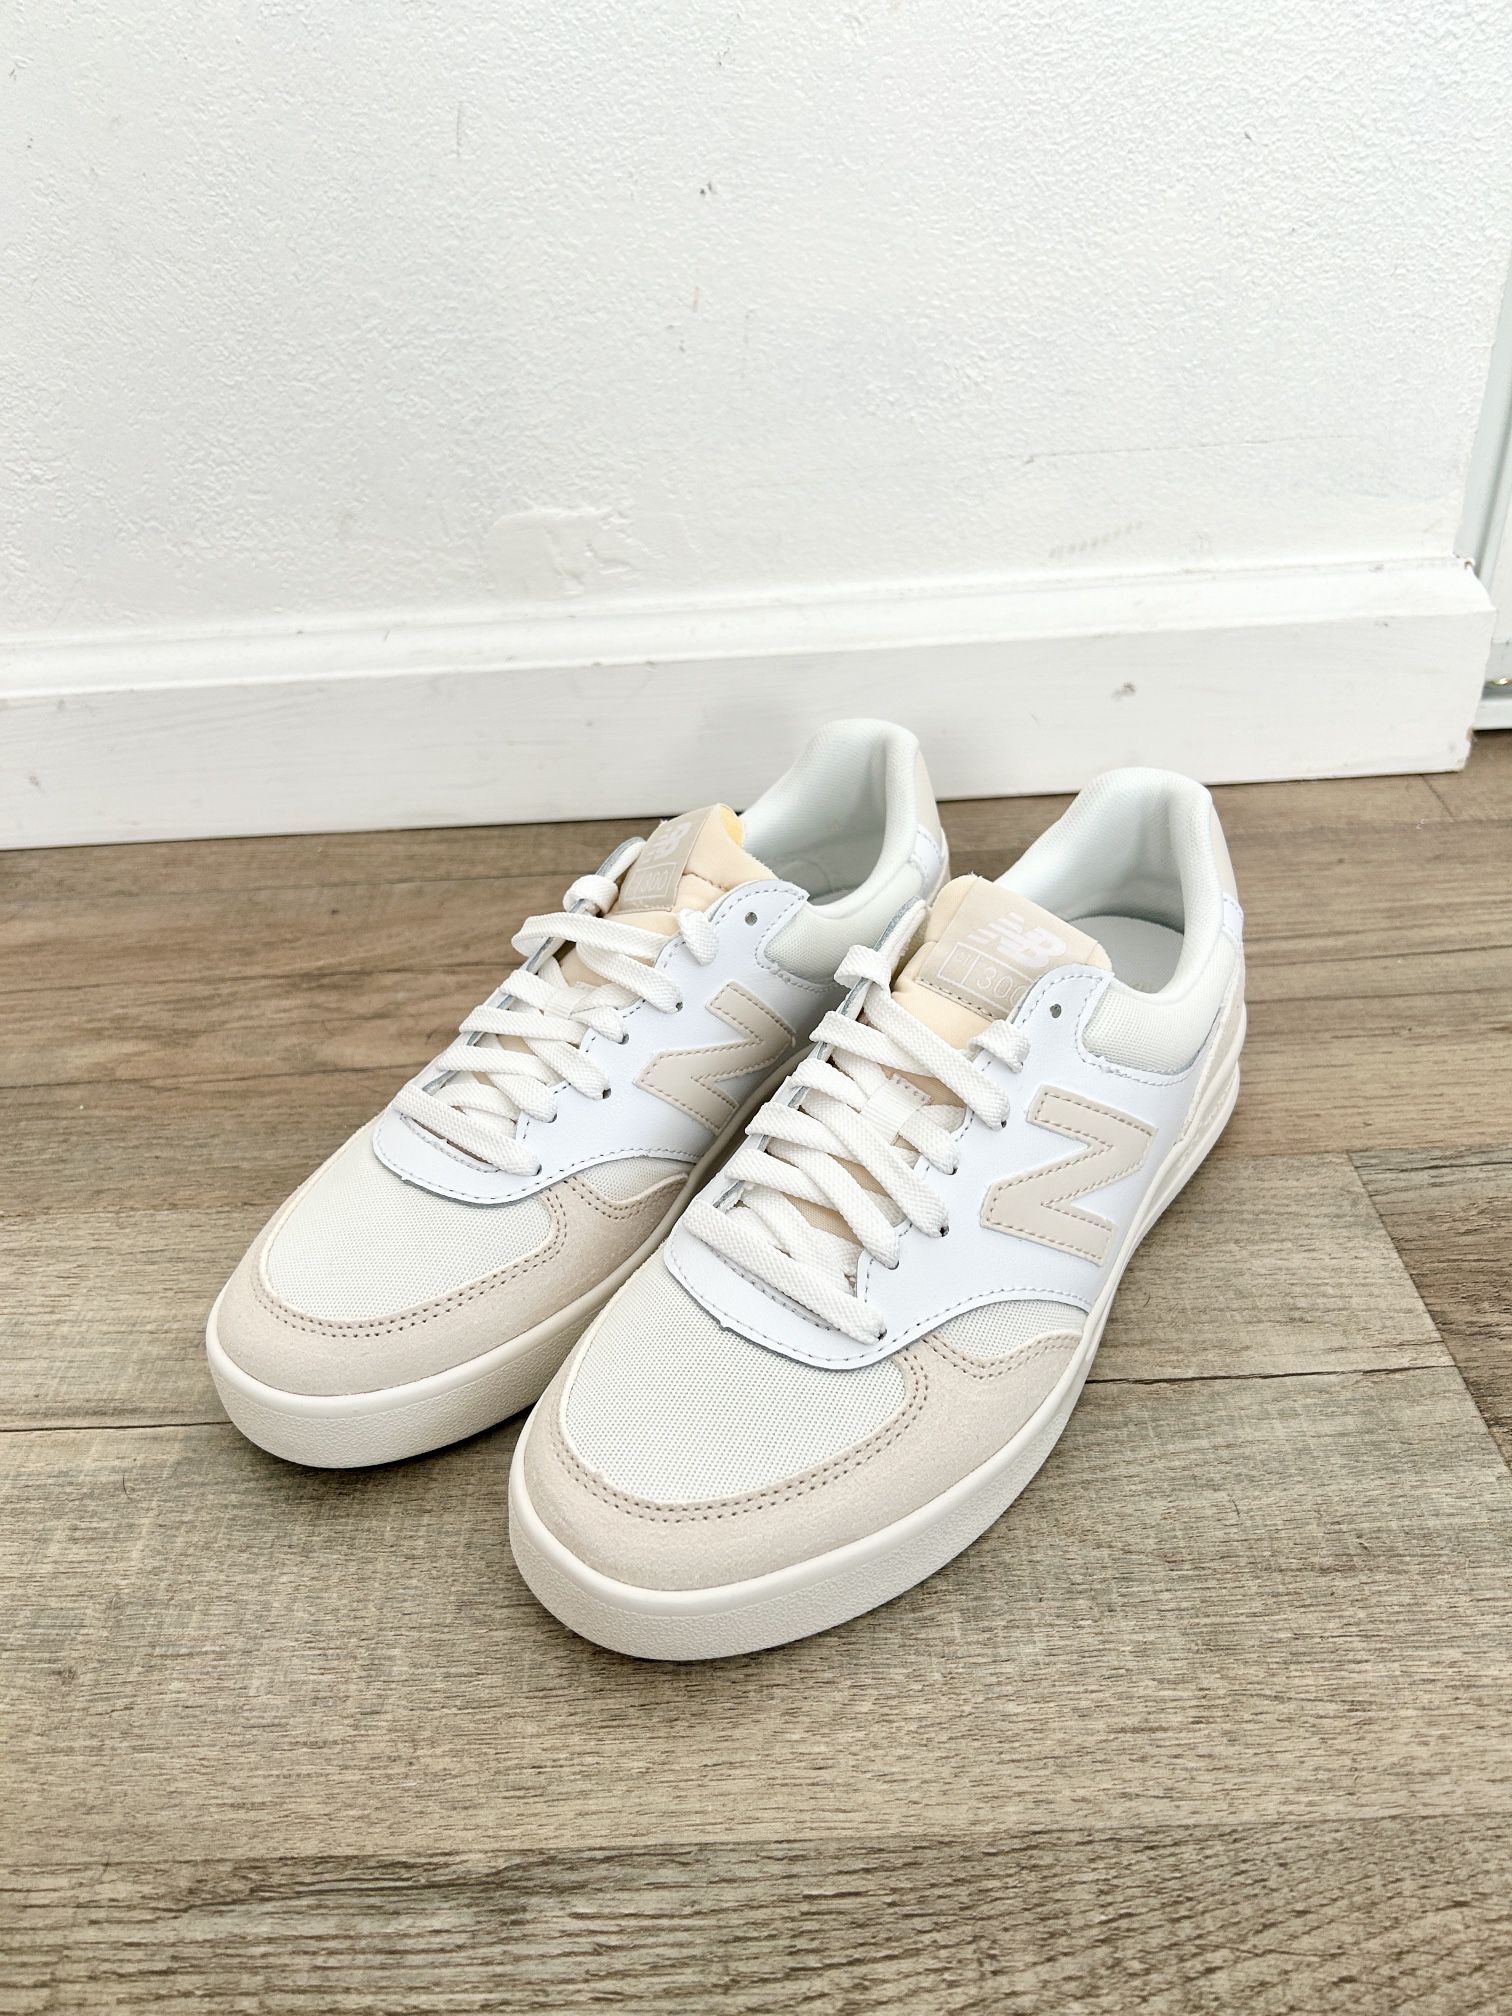 NEW New Balance white beige leather sneakers 6.5